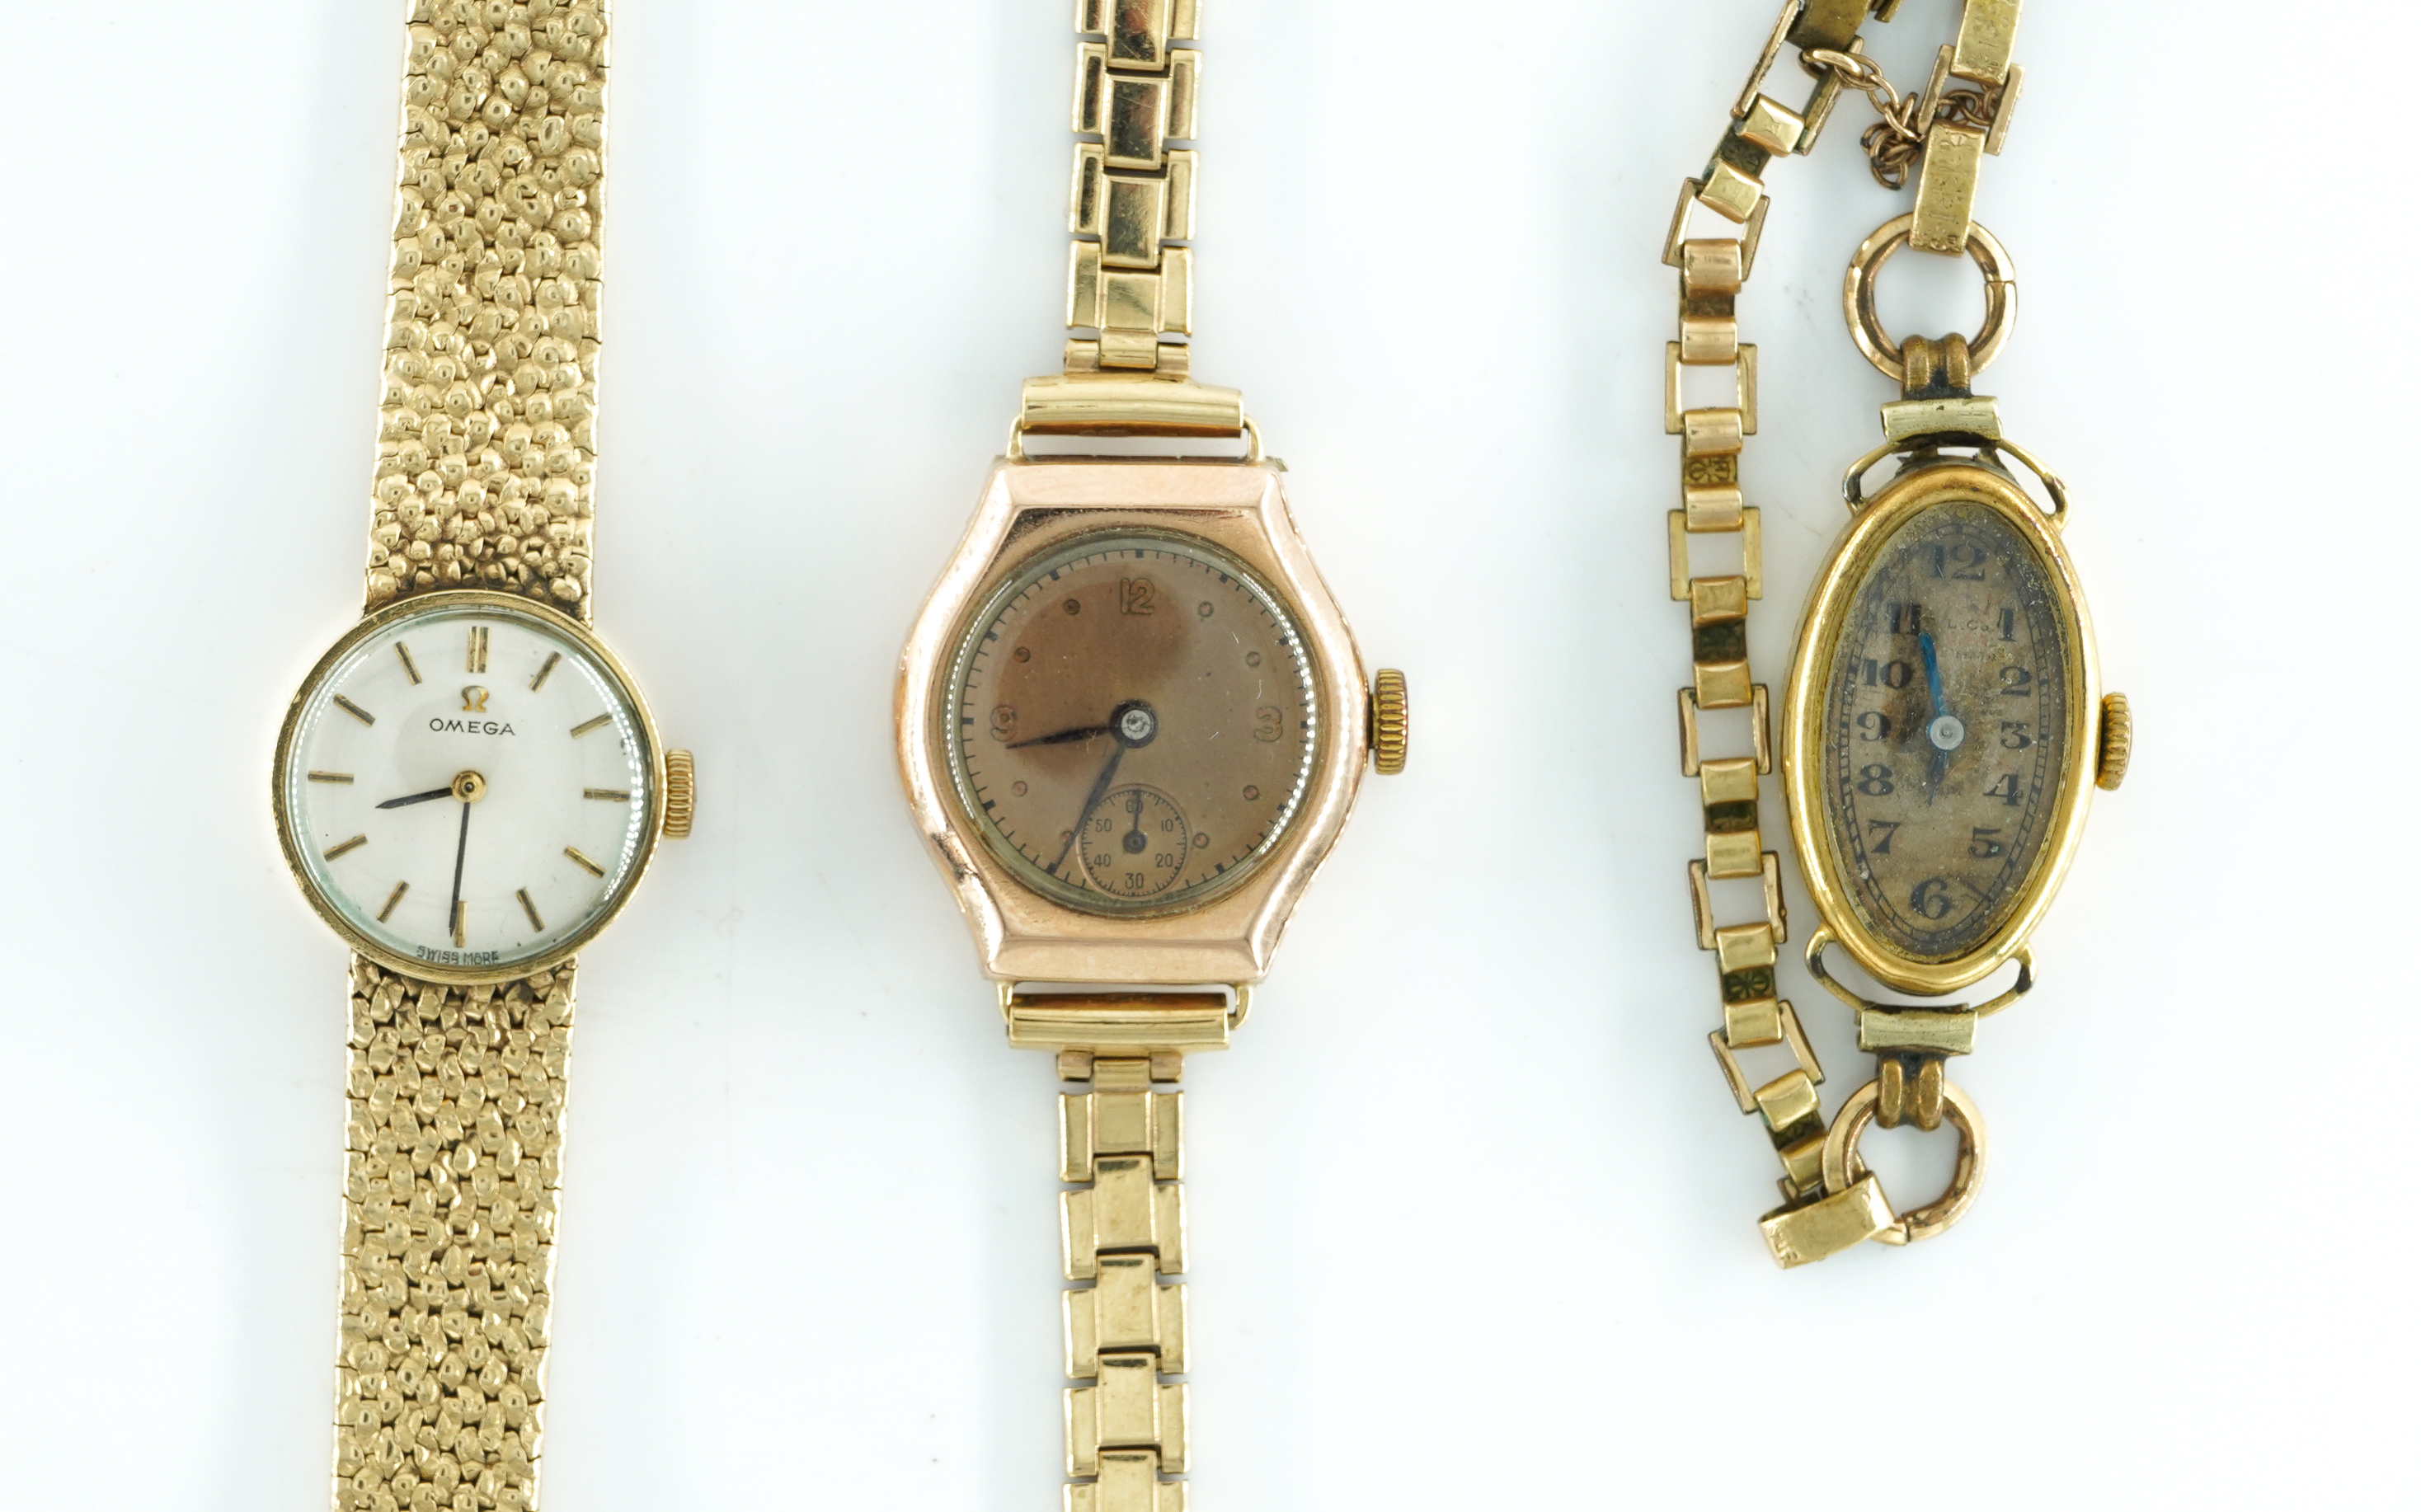 OMEGA. A LADIES 9CT GOLD MANUAL WIND BRACELET WRISTWATCH AND TWO FURTHER GOLD LADIES WATCHES (3) - Image 2 of 2